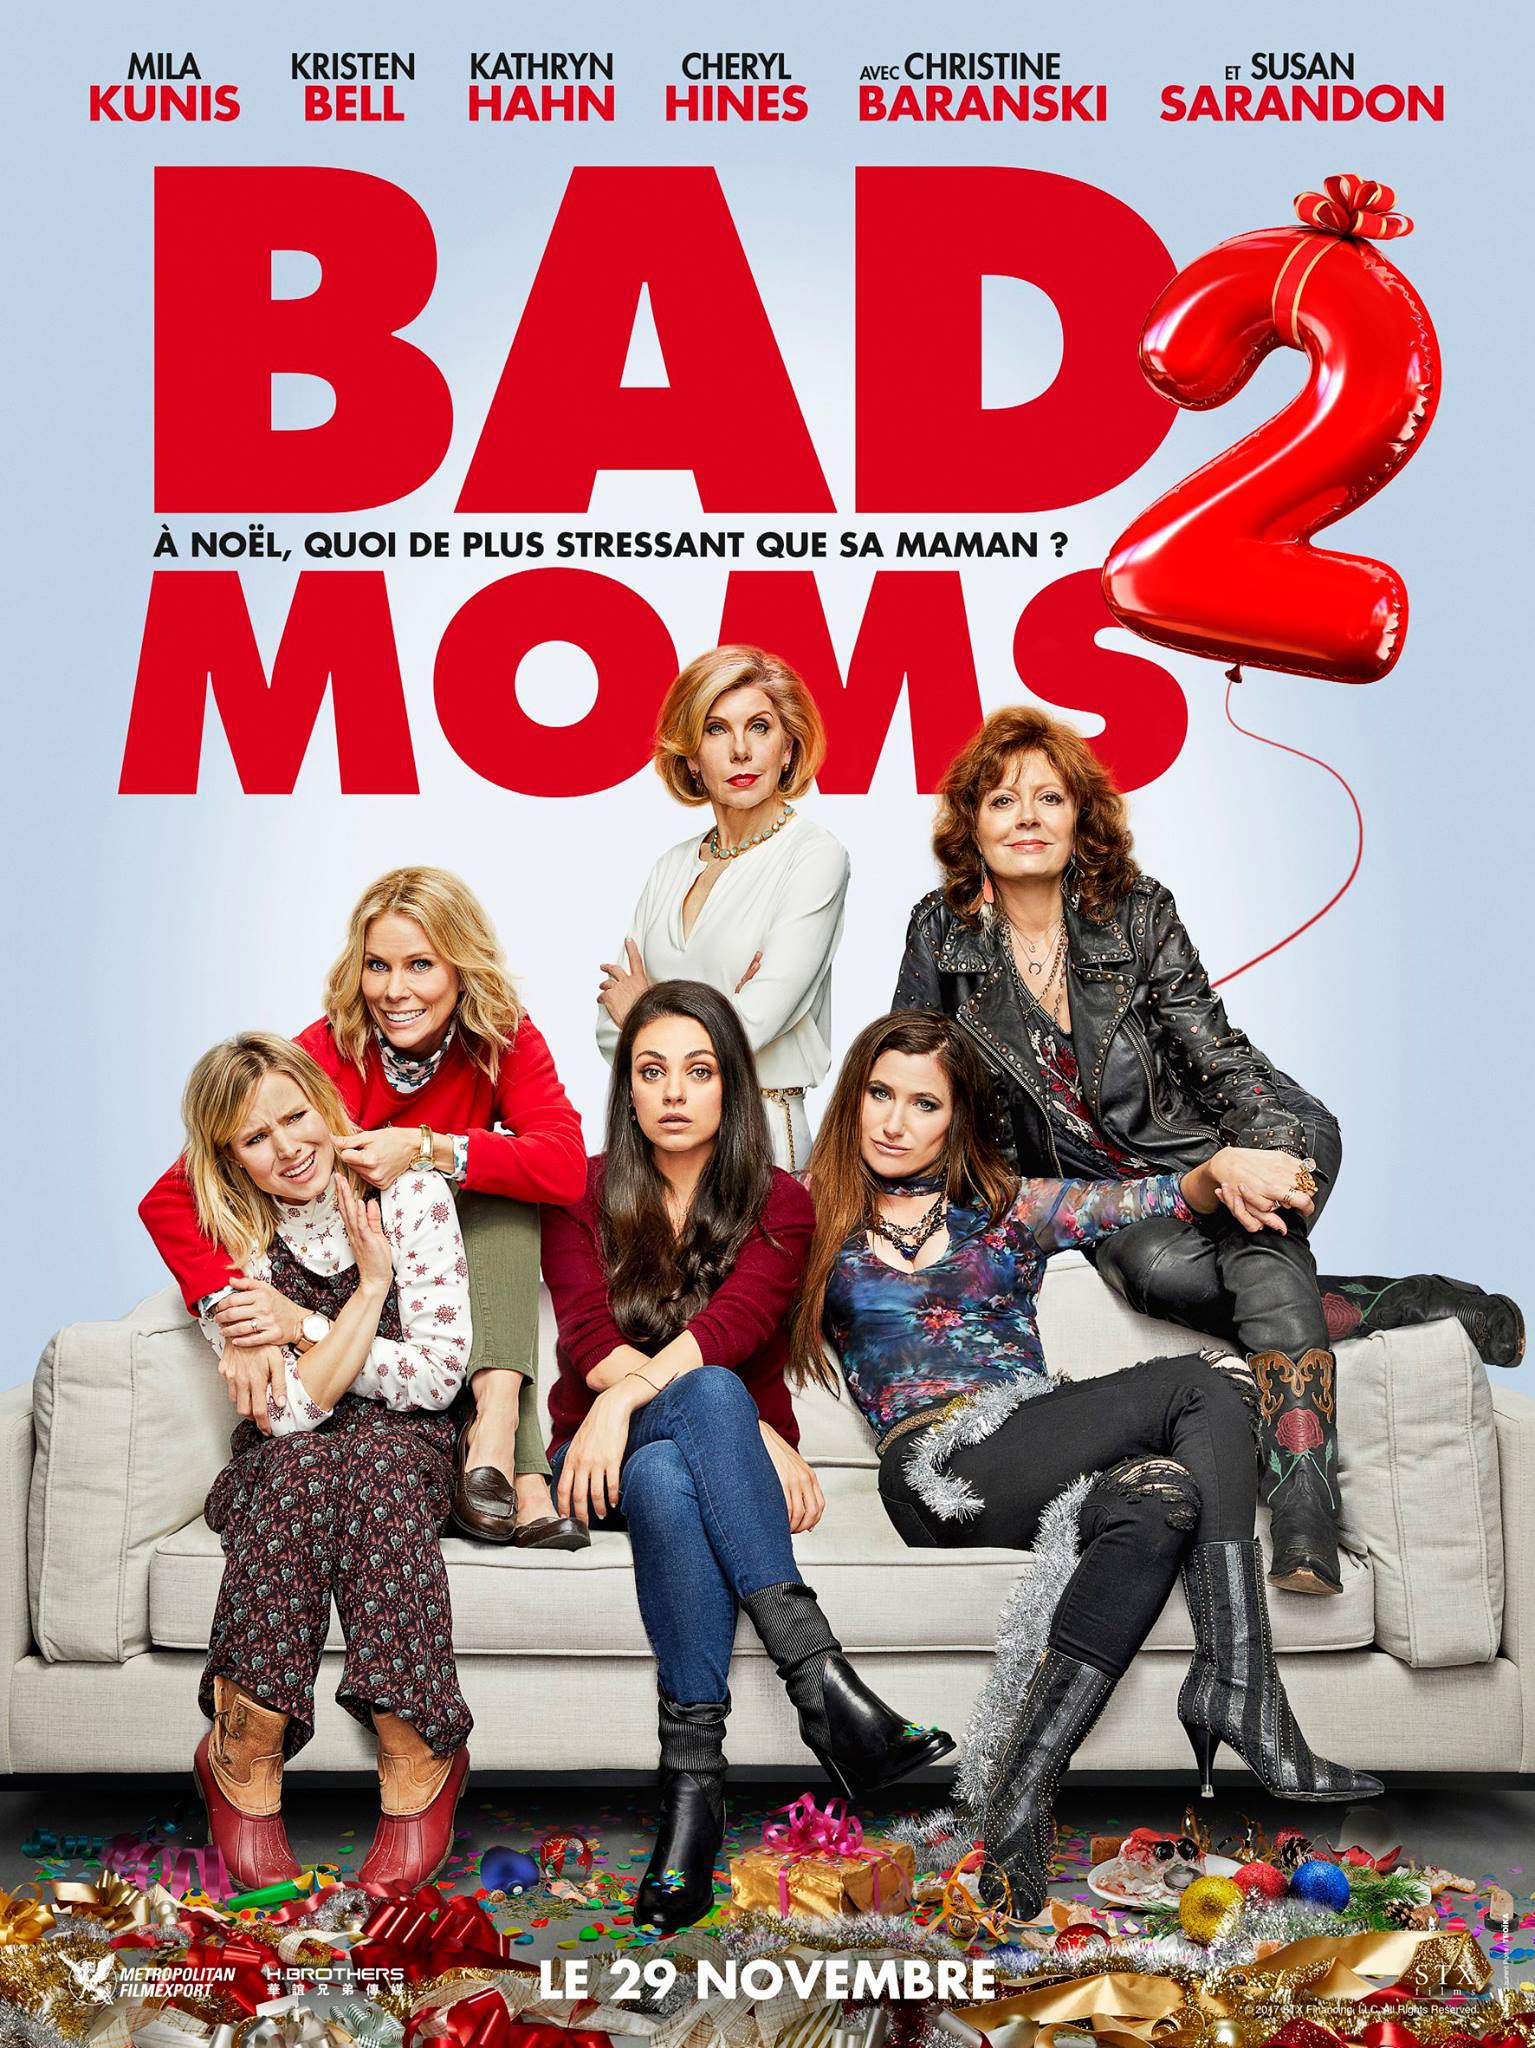 Mega Sized Movie Poster Image for A Bad Moms Christmas (#9 of 10)